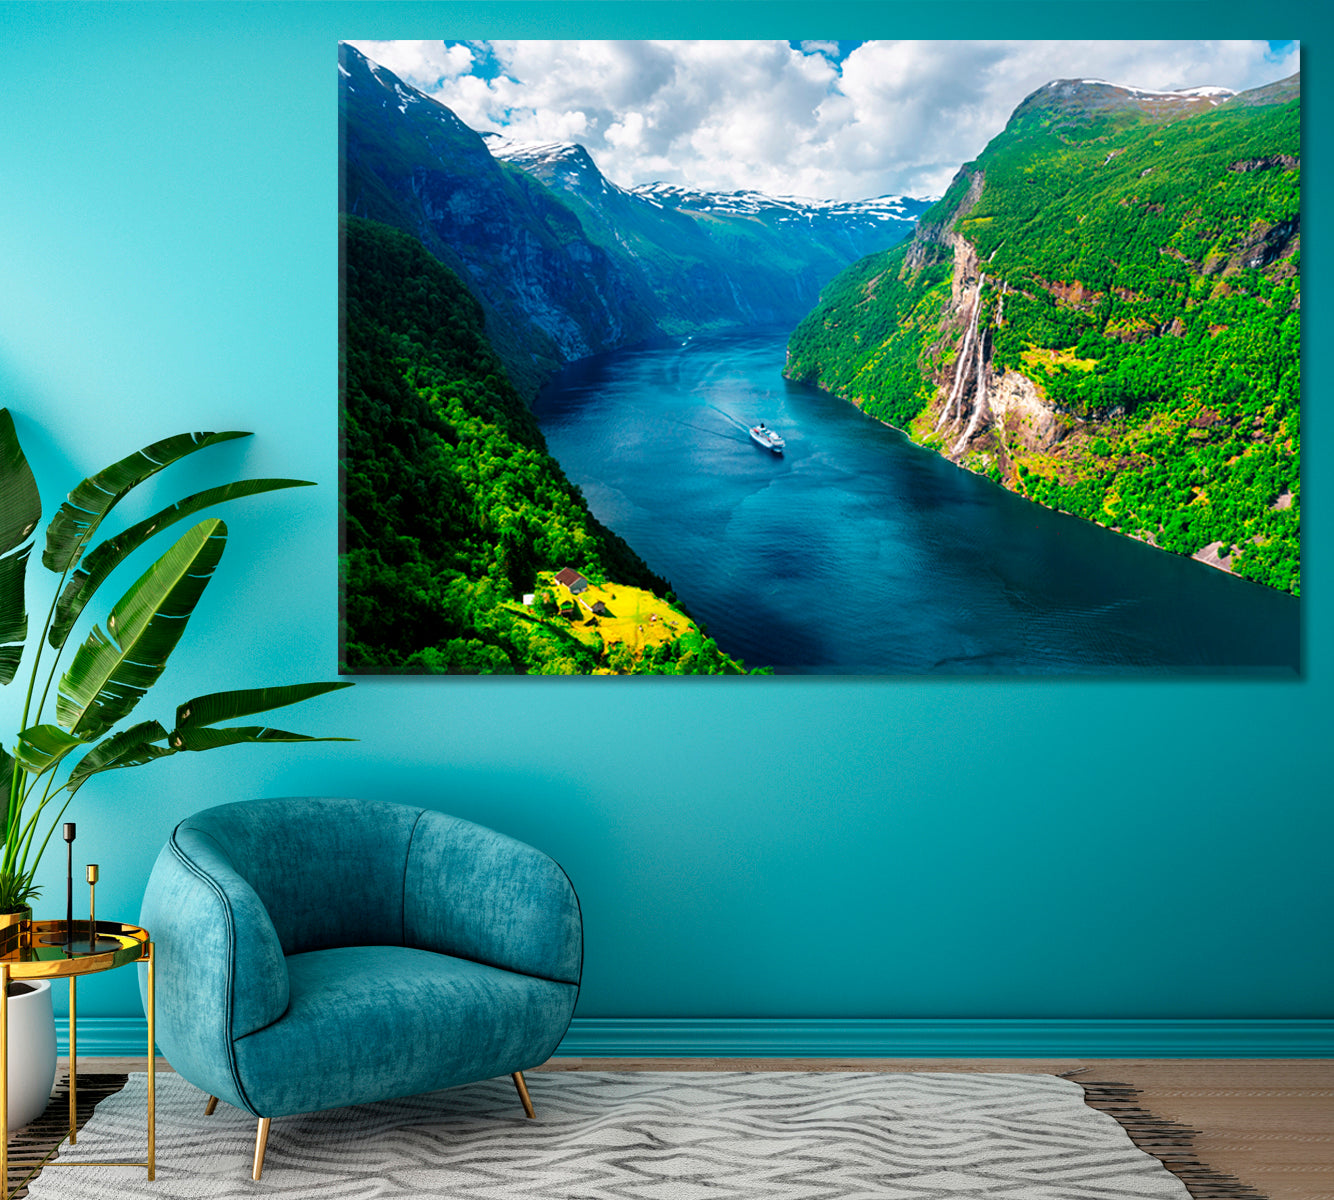 Sunnylvsfjorden Fjord and Seven Sisters Waterfalls Norway Canvas Print ArtLexy 1 Panel 24"x16" inches 